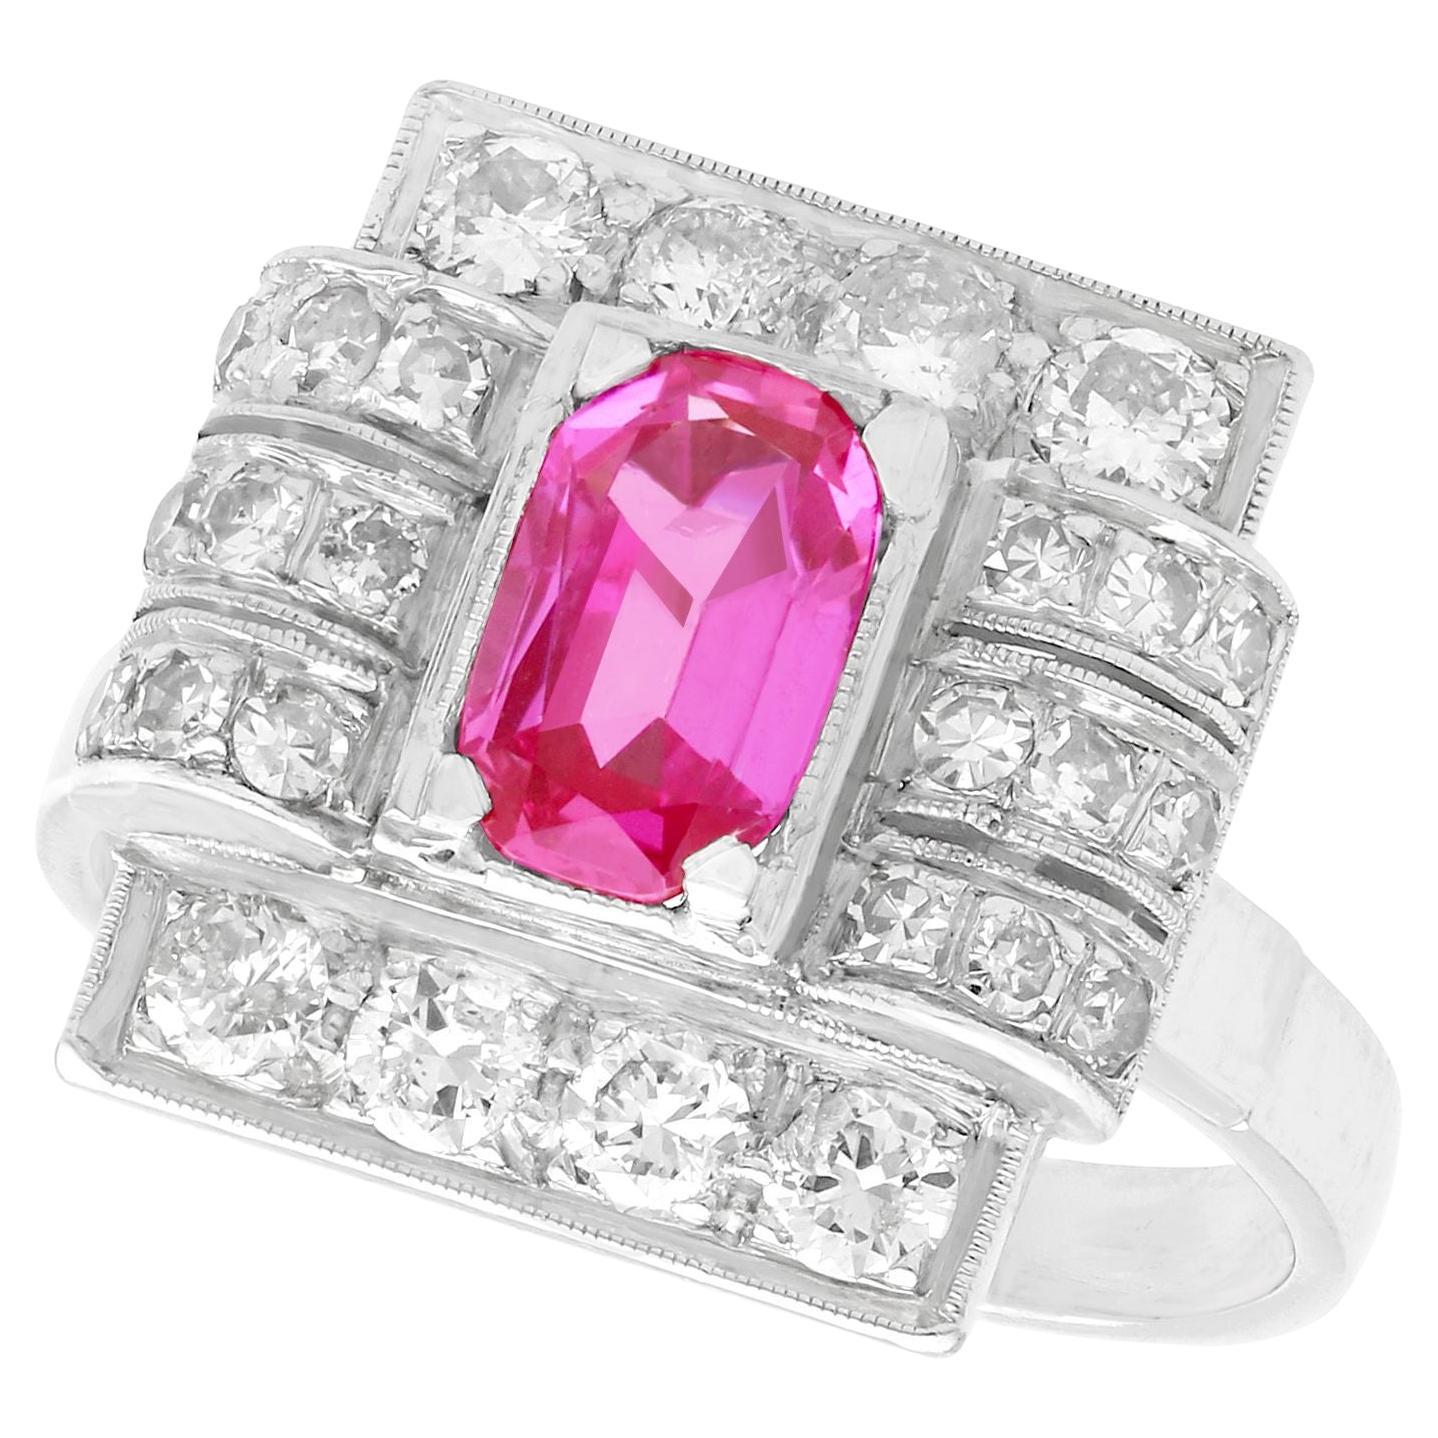 1950s 1.45 Carat Pink Sapphire and Diamond White Gold and Platinum Cocktail Ring For Sale